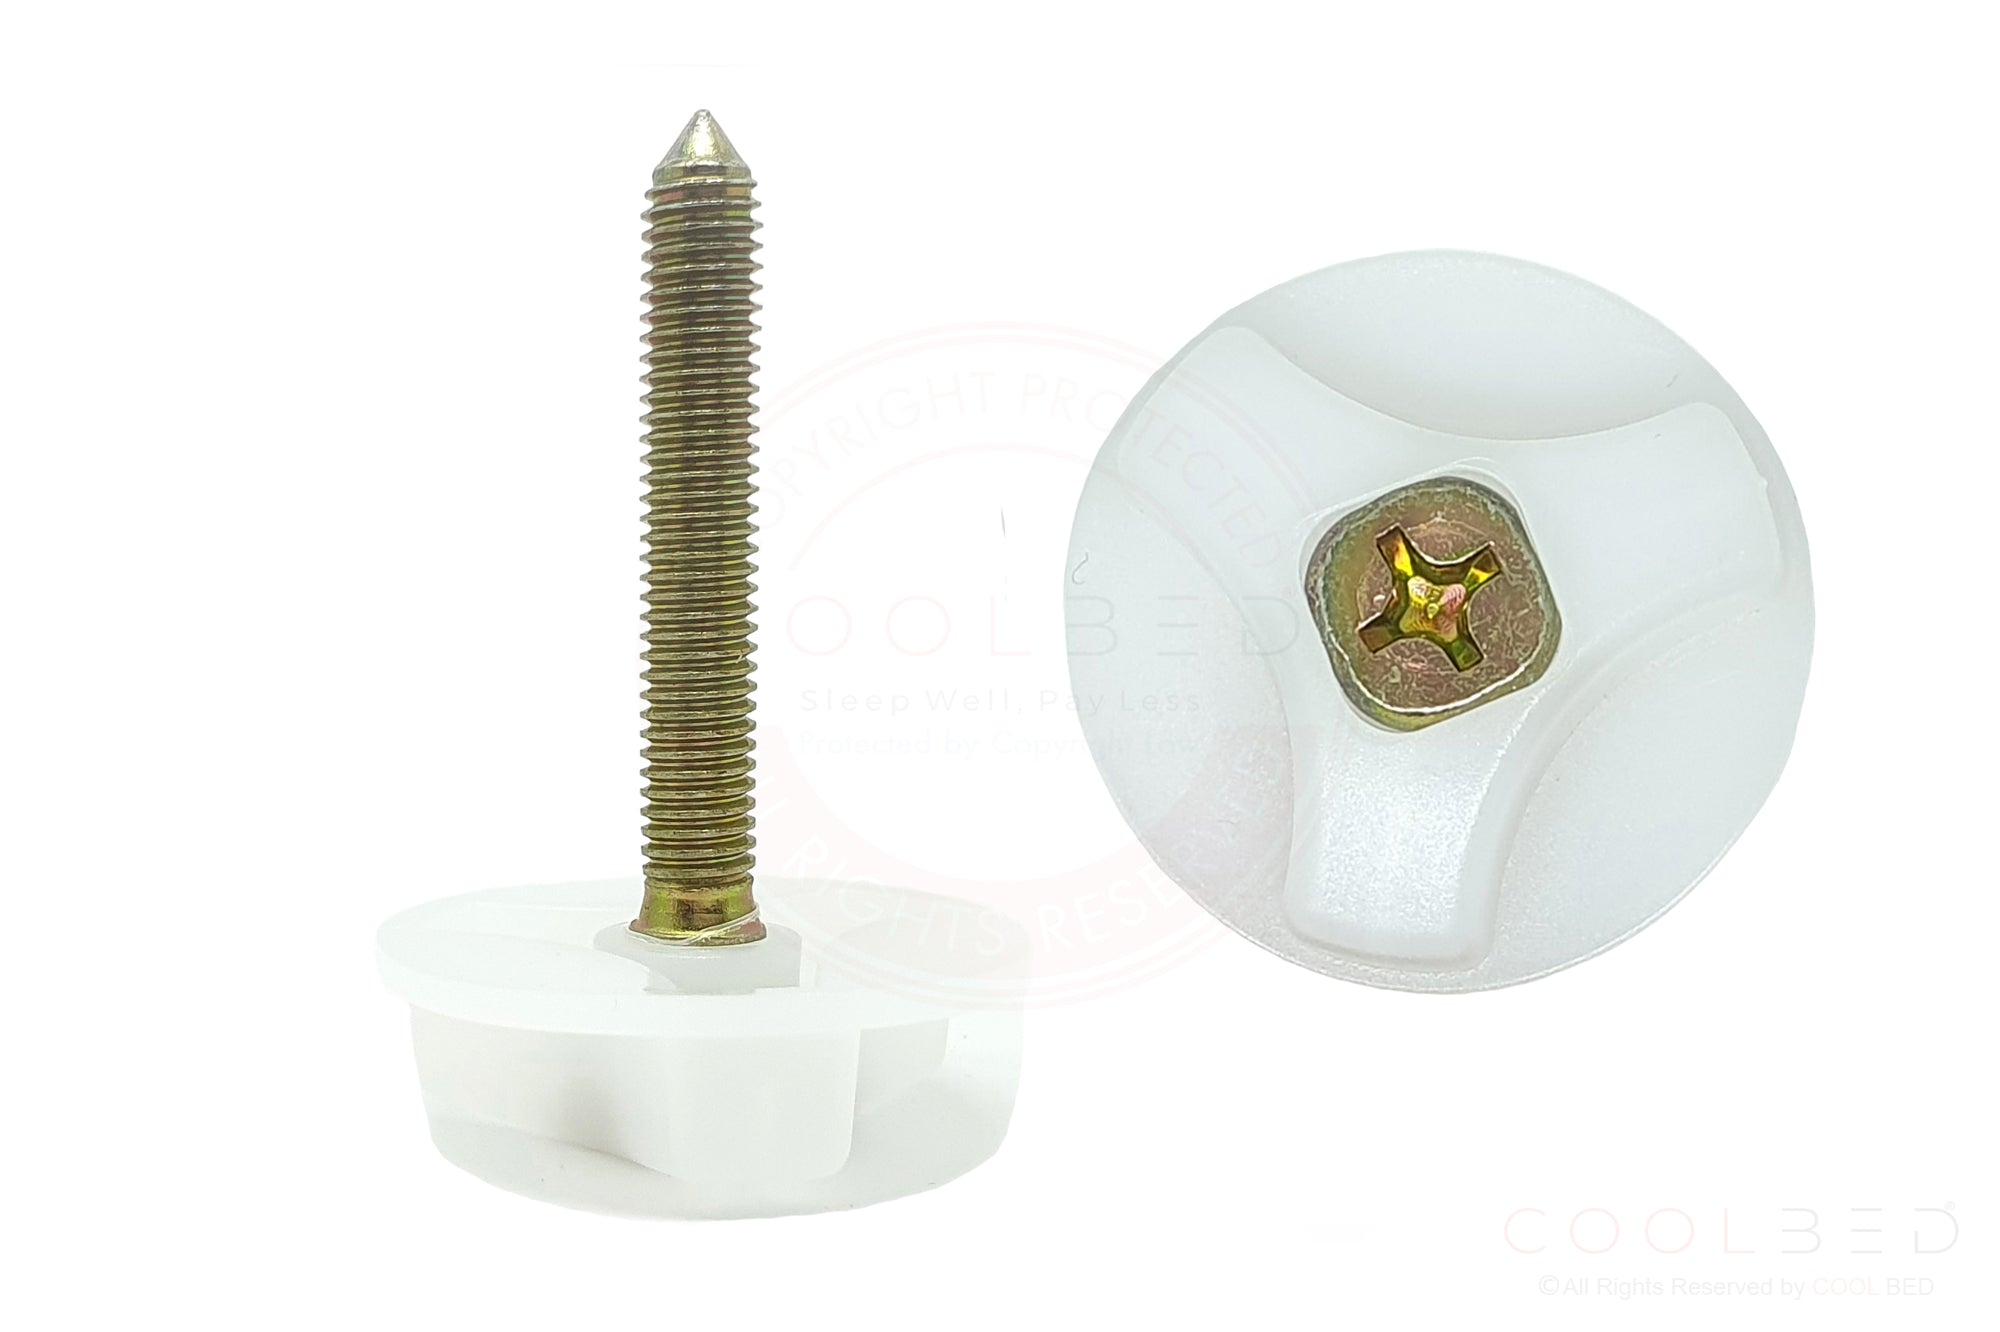 M8 Headboard Bolts Screw With Fitted Washers